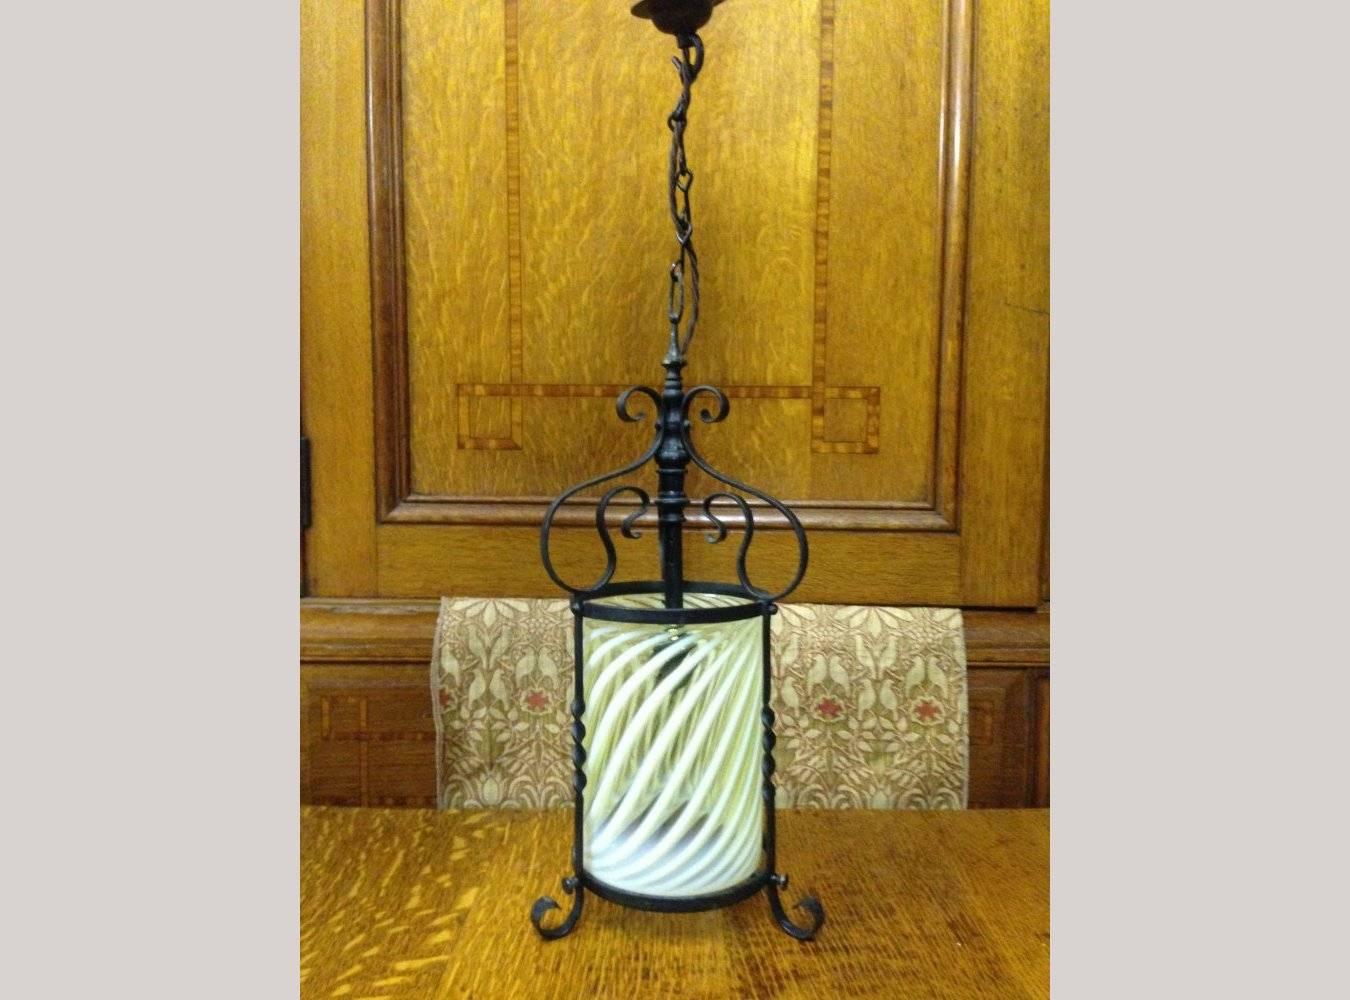 James Powell. Attributed.
An Arts and Crafts iron lantern retaining the Original Swirling Vaseline/Uranium Glass shade.
Measures: Height 17